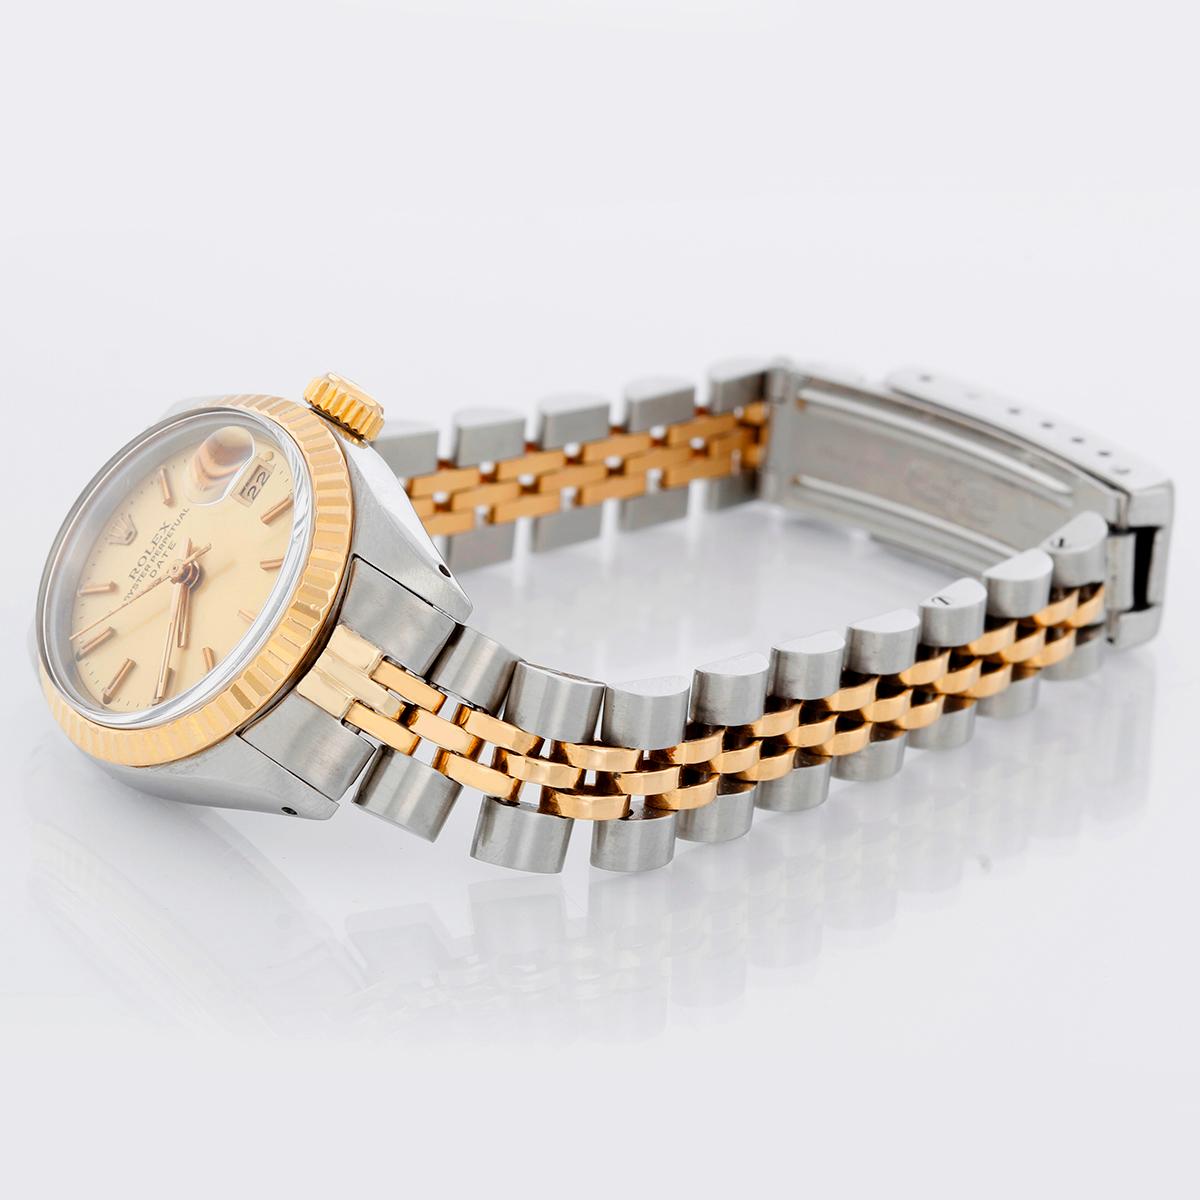 Rolex Ladies Datejust 2-tone Watch 6917 - Automatic winding, acrylic crystal. Stainless steel case with yellow gold Fluted bezel (26mm diameter). Champagne stick dial. Stainless steel and 14k yellow gold Jubilee bracelet. Pre-owned with custom box.